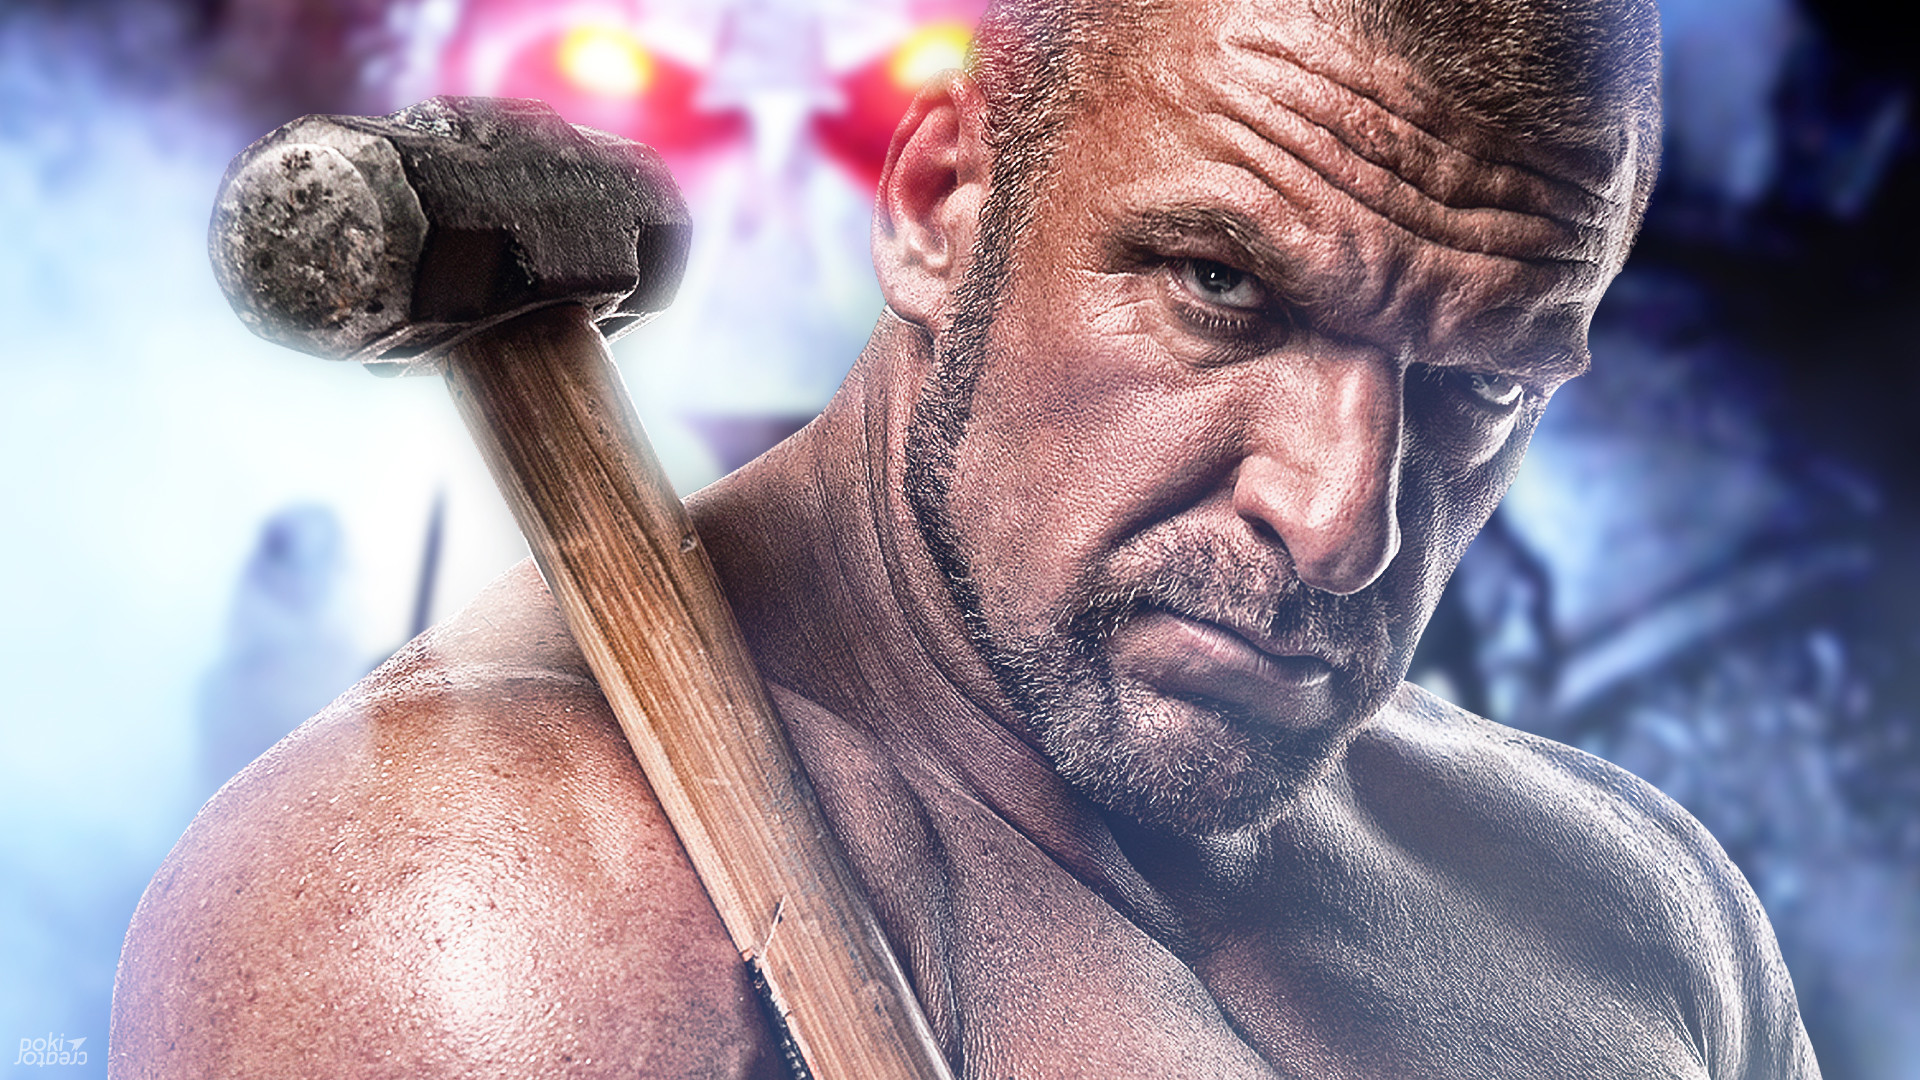 1920x1080 ... Wallpaper: Triple H With Sledgehammer by pokidkinv